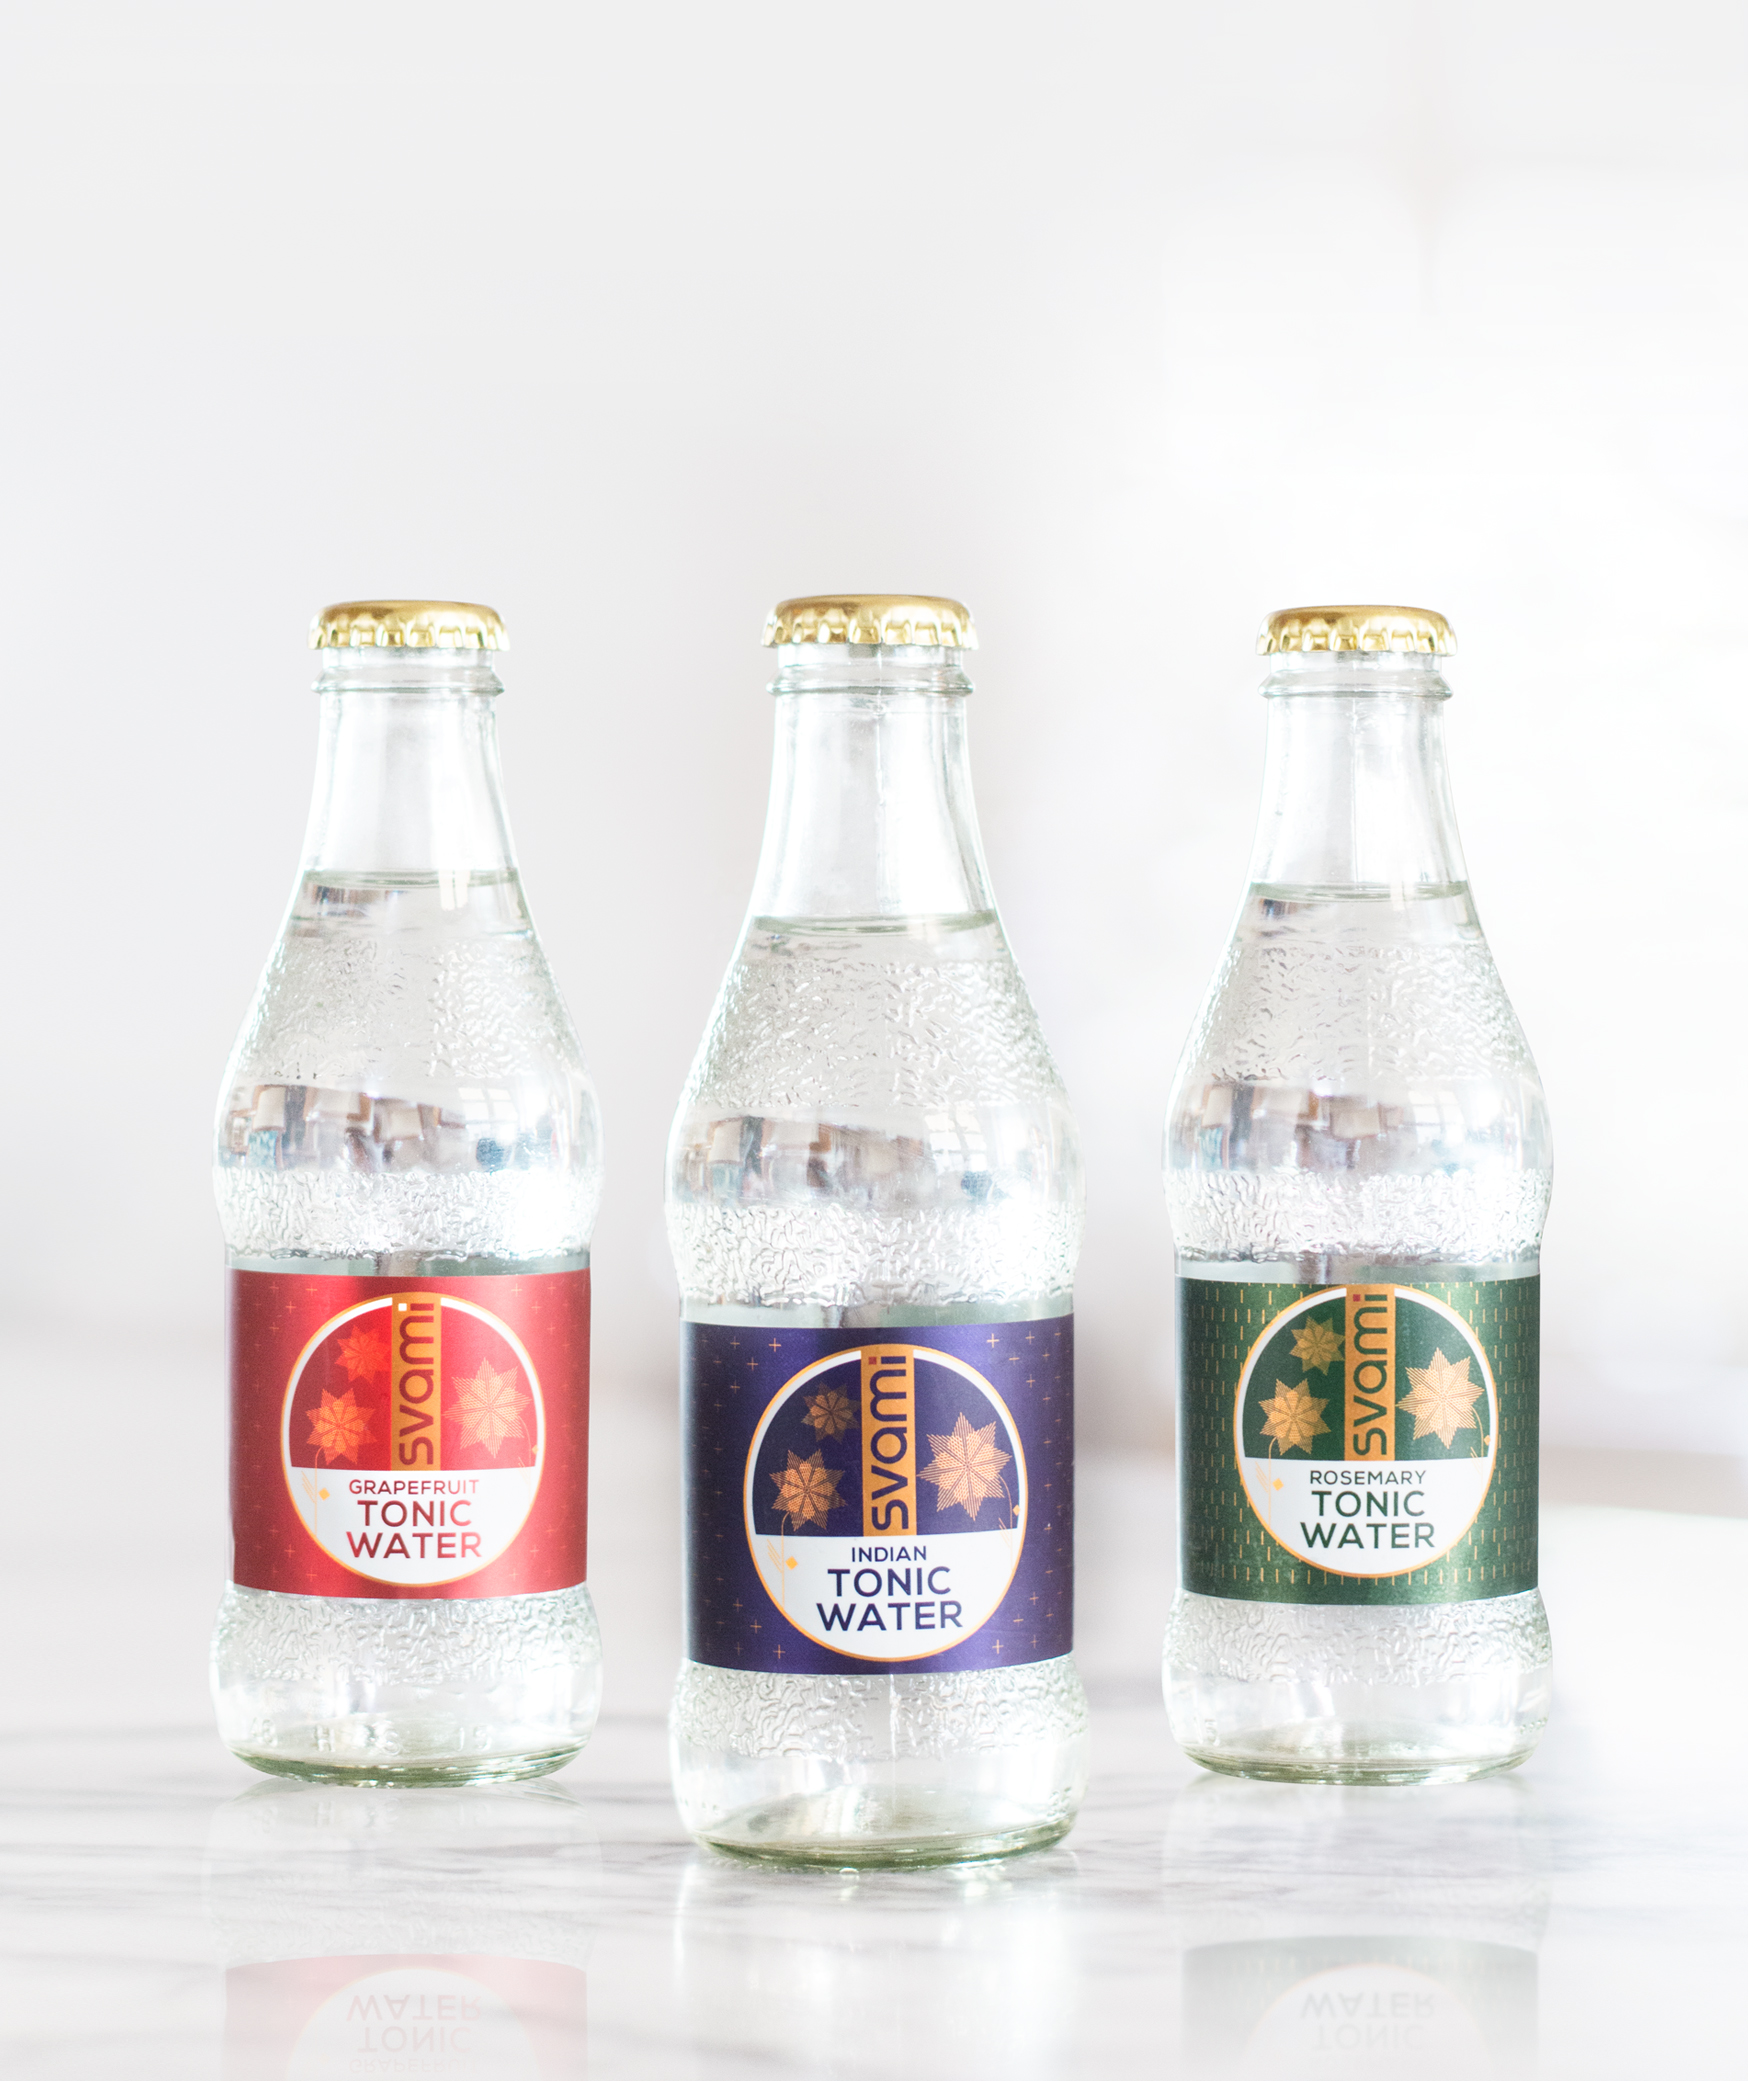 Please See / Svami, India’s First Artisan Tonic Water